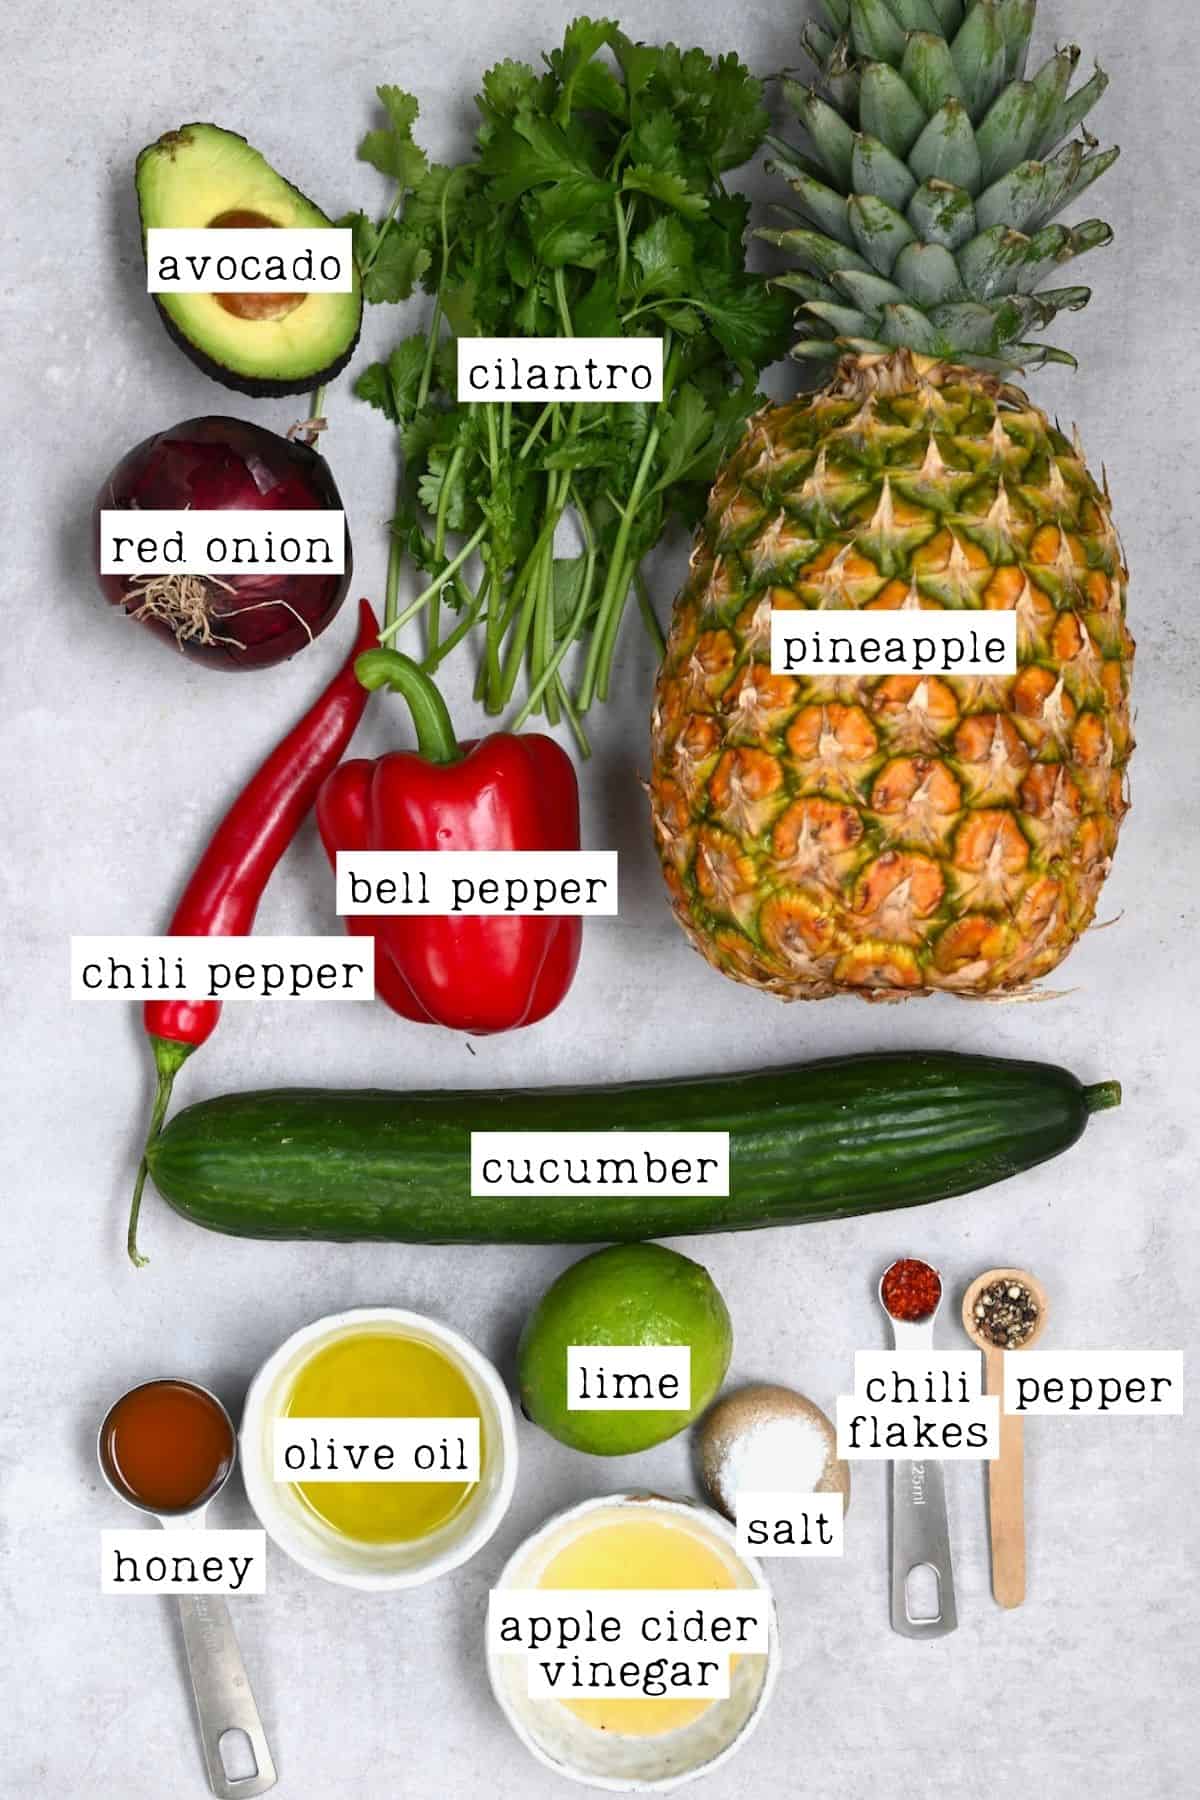 Ingredients for pineapple salad